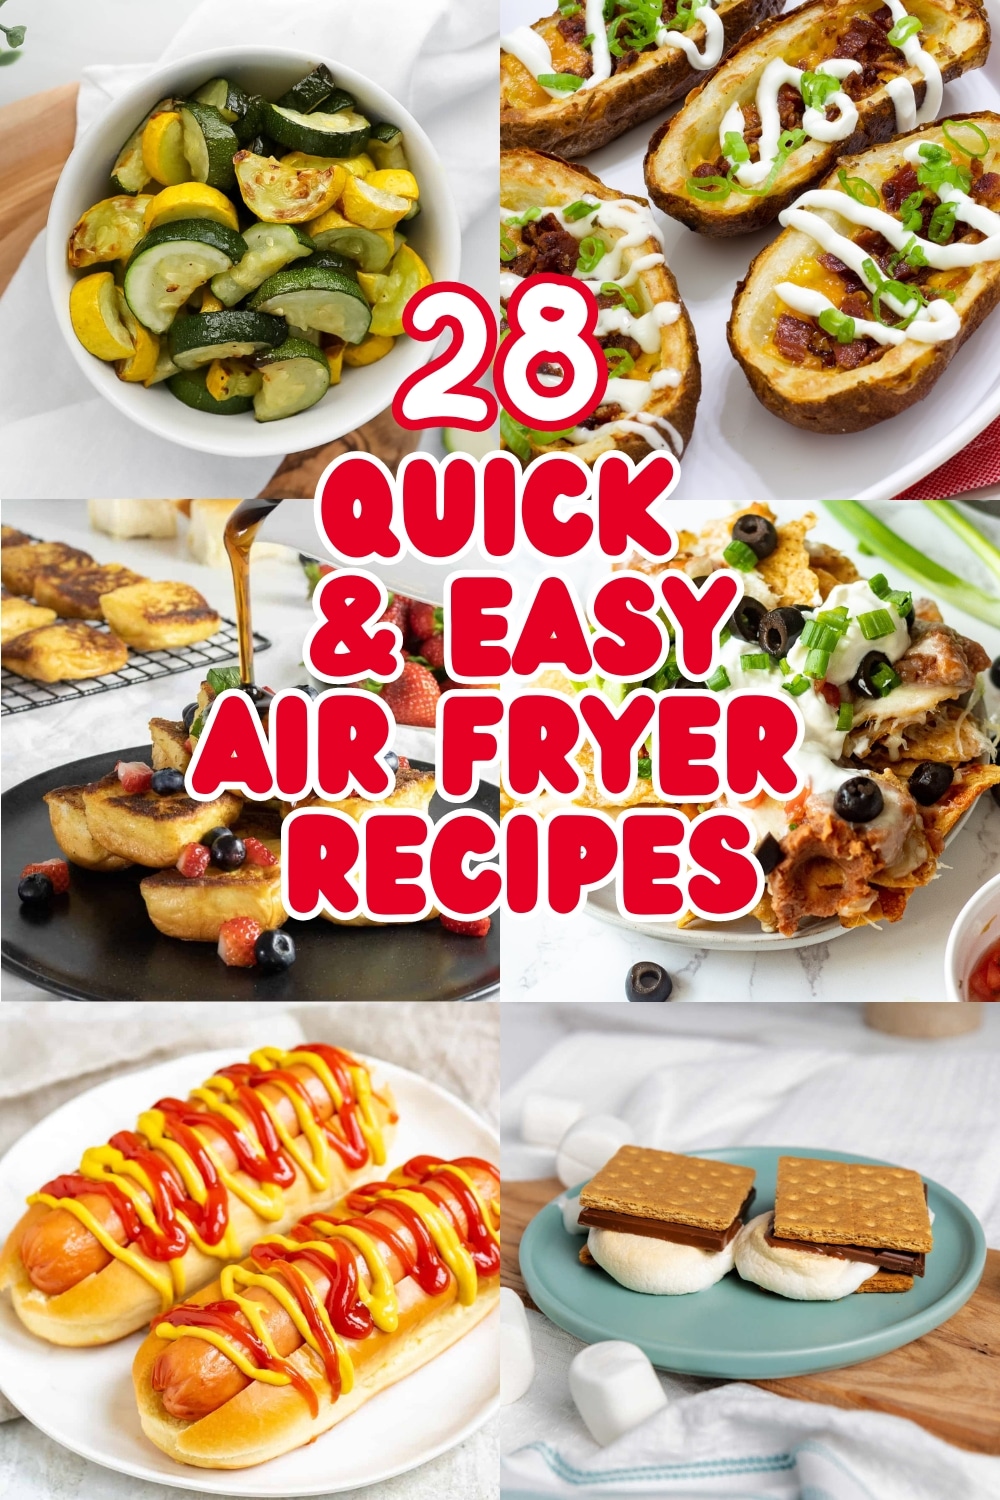 Whip up tasty meals with 28 Quick and easy Air Fryer Recipes You Need to Make. Easy, crispy, and delicious dishes at your fingertips! via @mindyscookingobsession